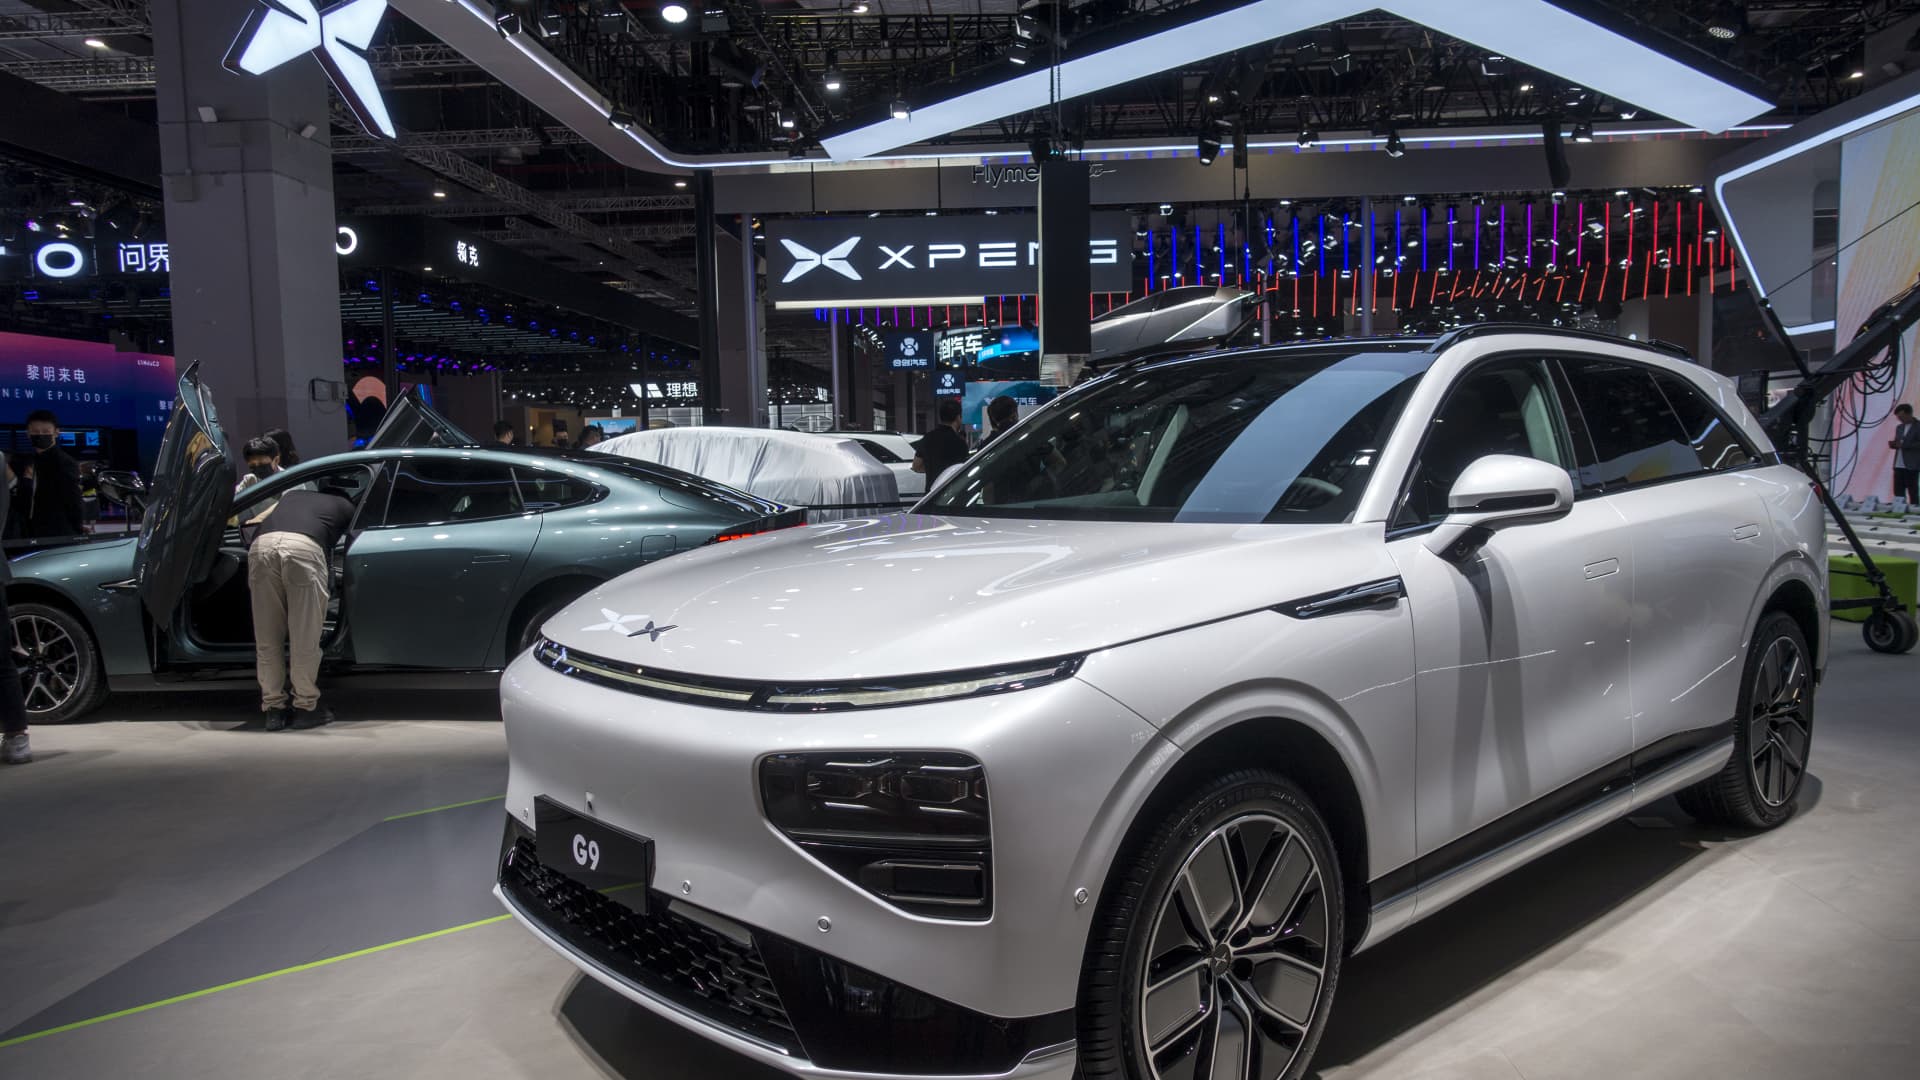 Chinese EV maker Xpeng sees highest deliveries this year but is eclipsed by rivals Nio, Li Auto